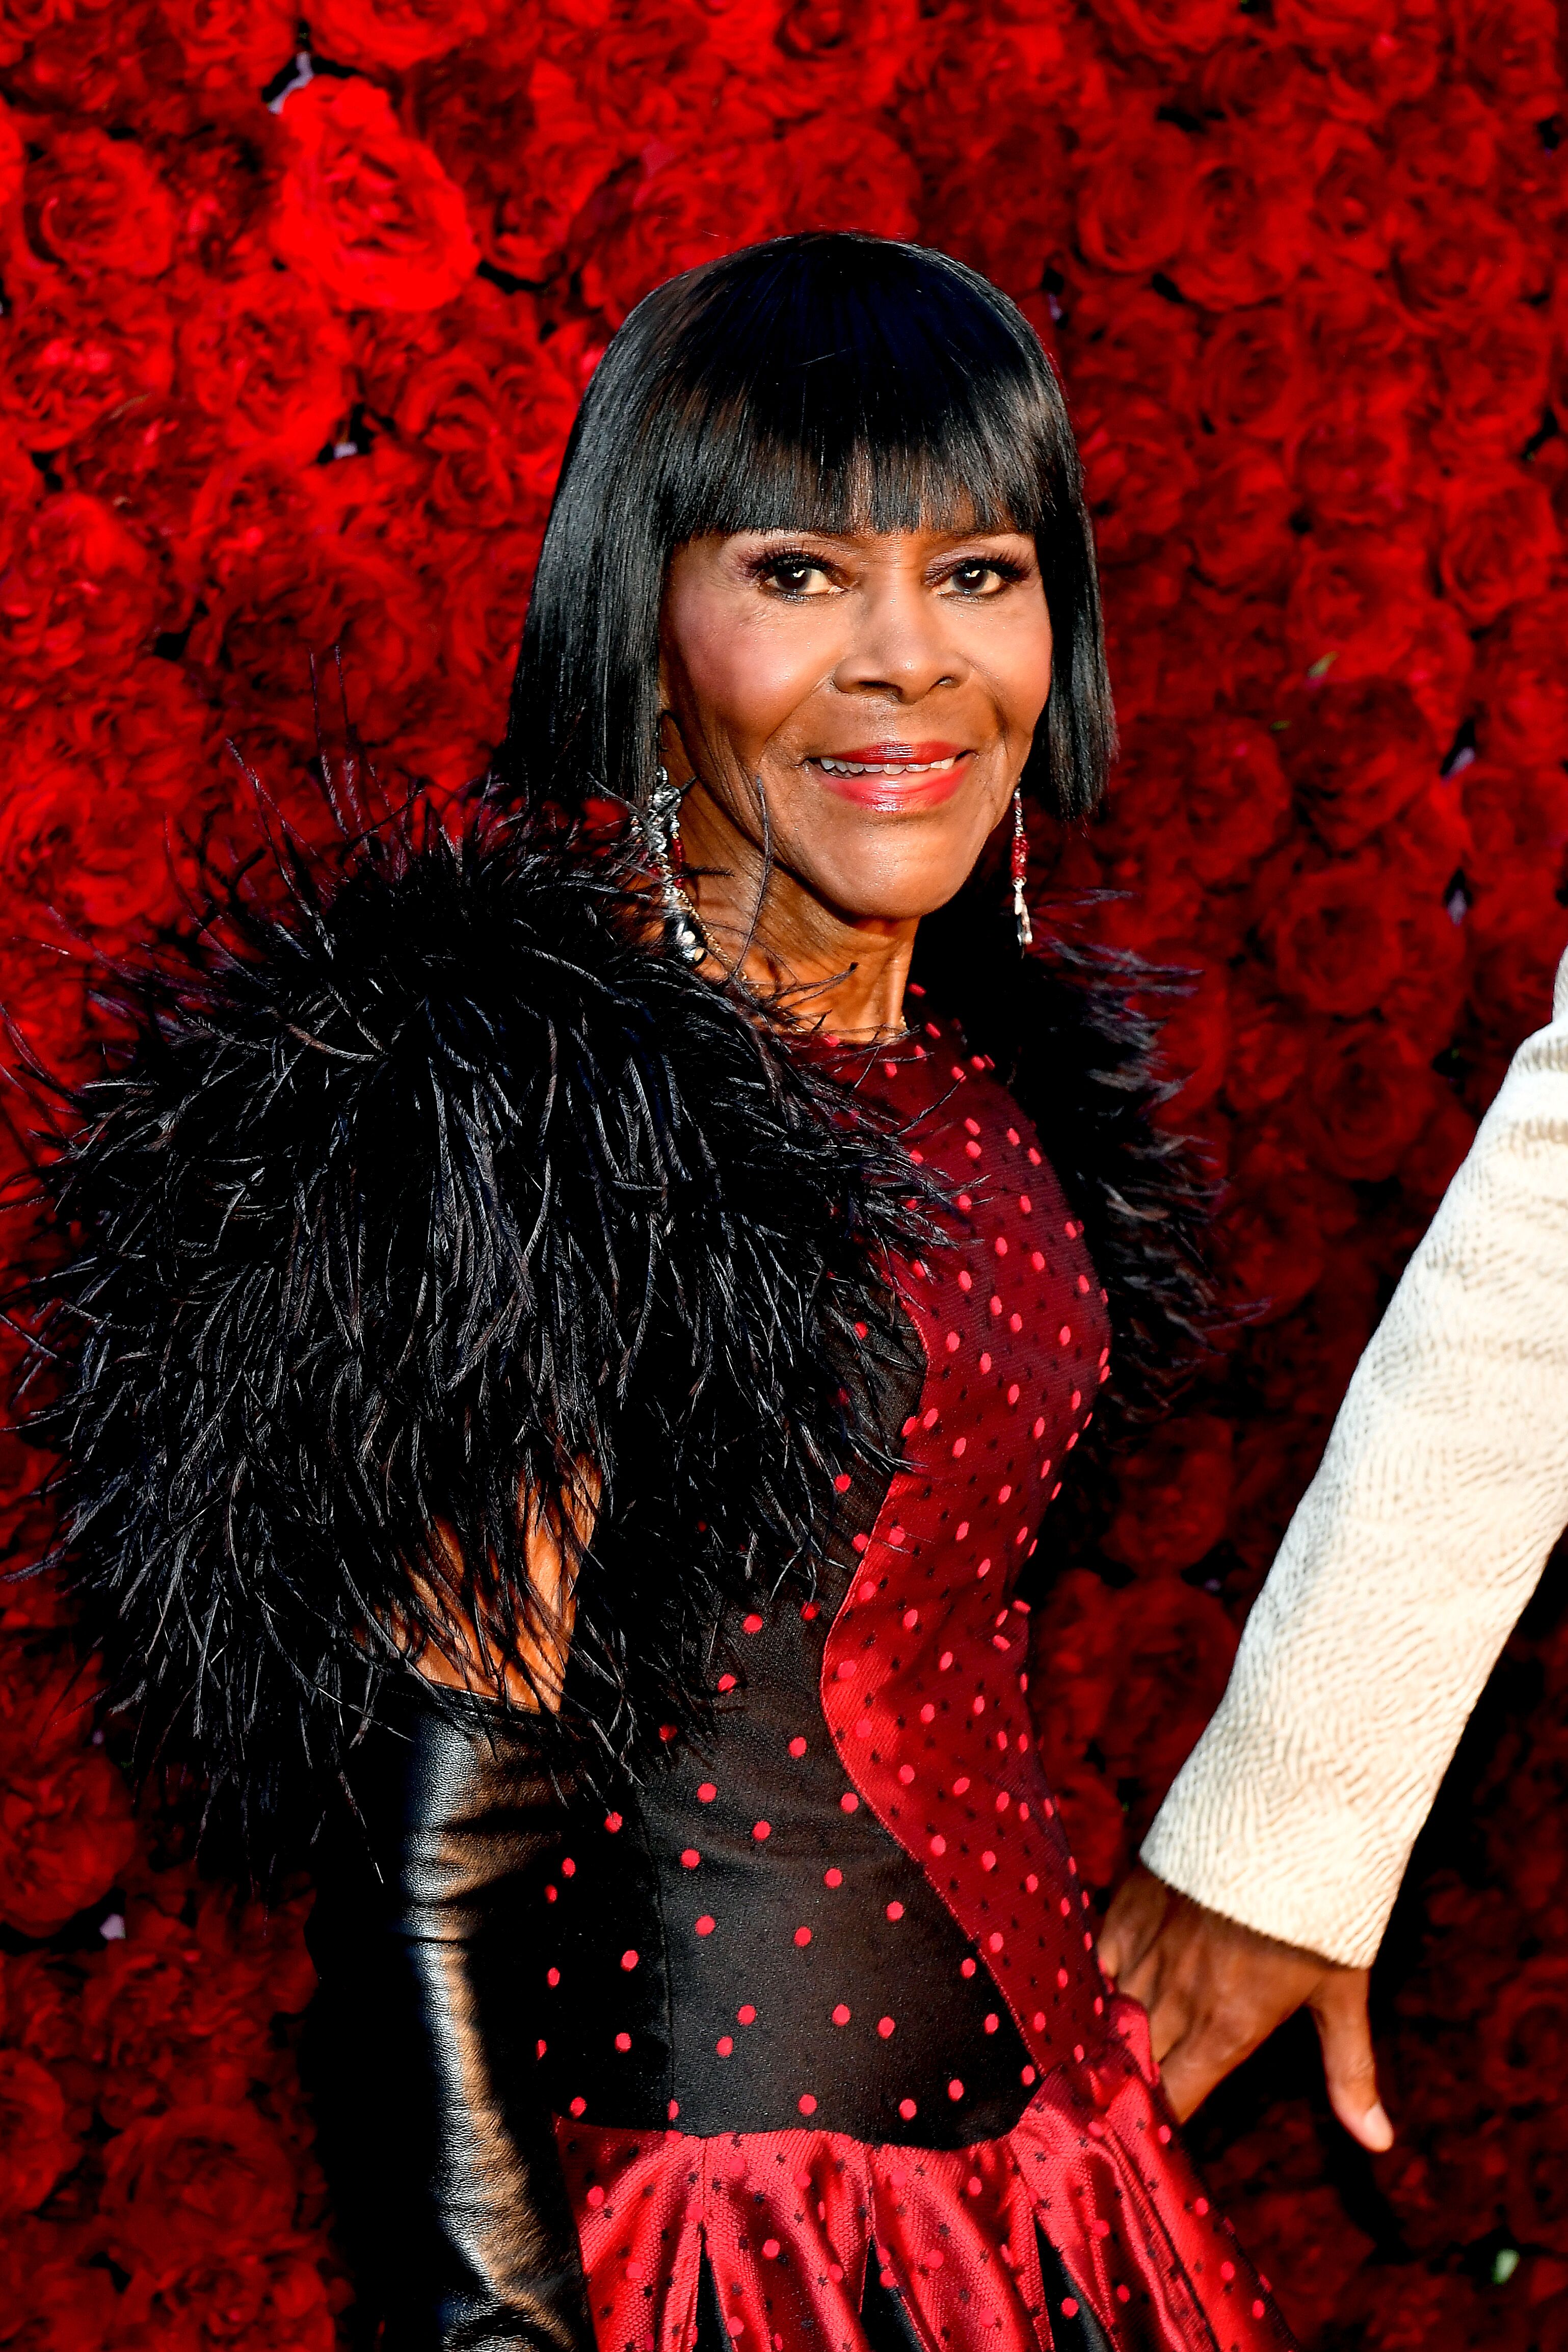 Cicely Tyson attends the grand opening gala of Tyler Perry Studios in Atlanta, Georgia on October 5, 2019. | Photo: Getty Images